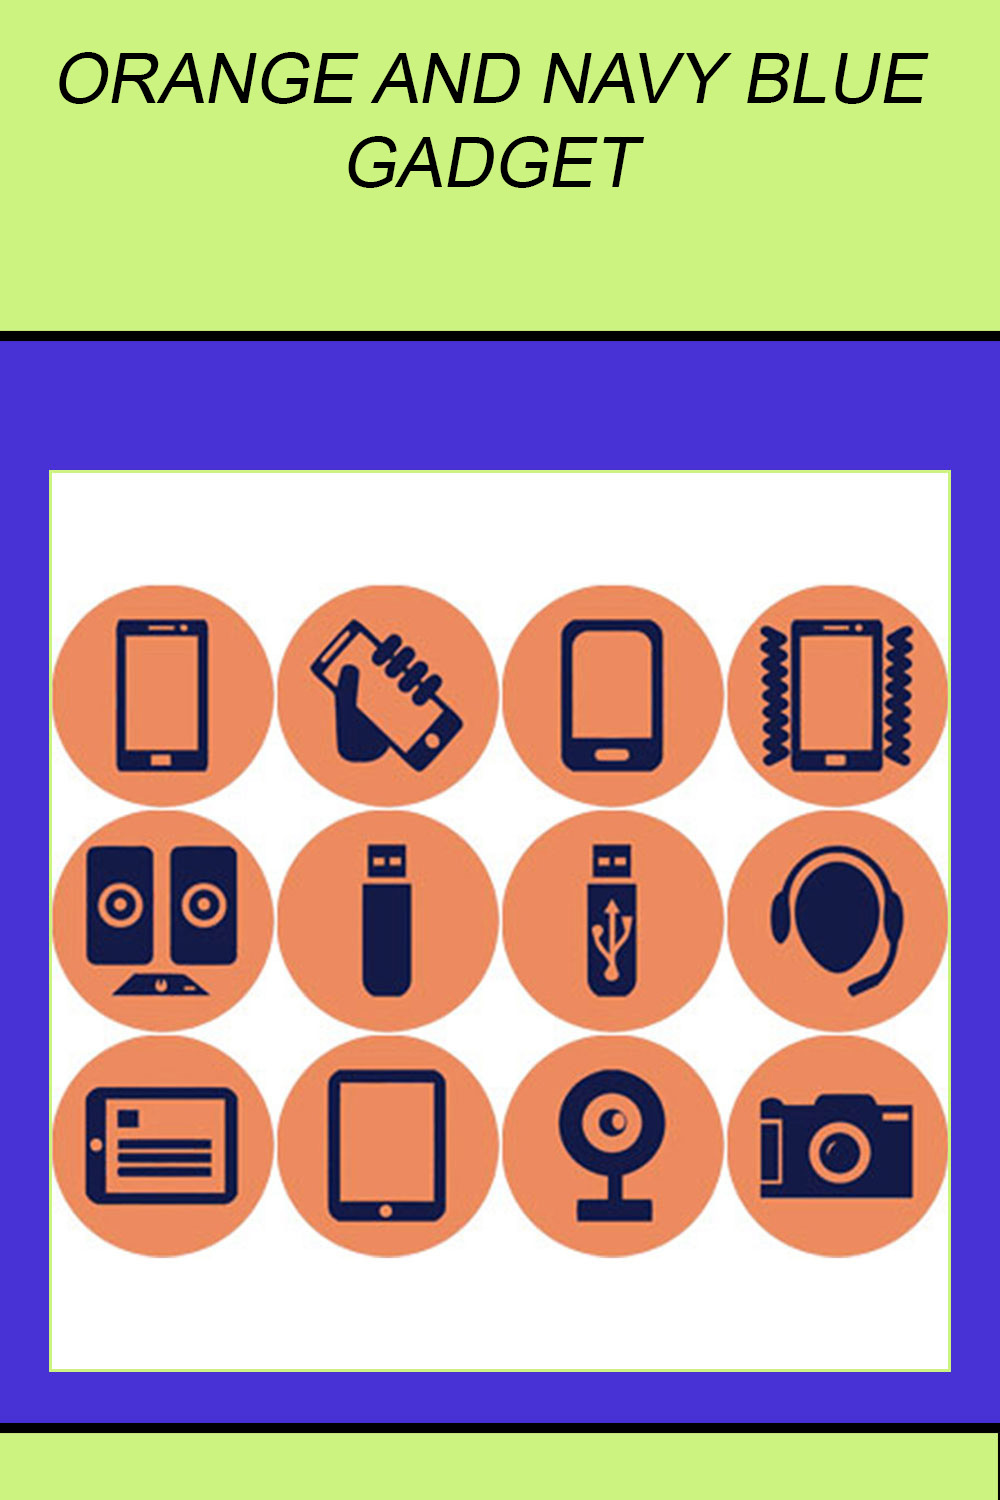 ORANGE AND NAVY BLUE GADGET ROUND ICONS pinterest preview image.